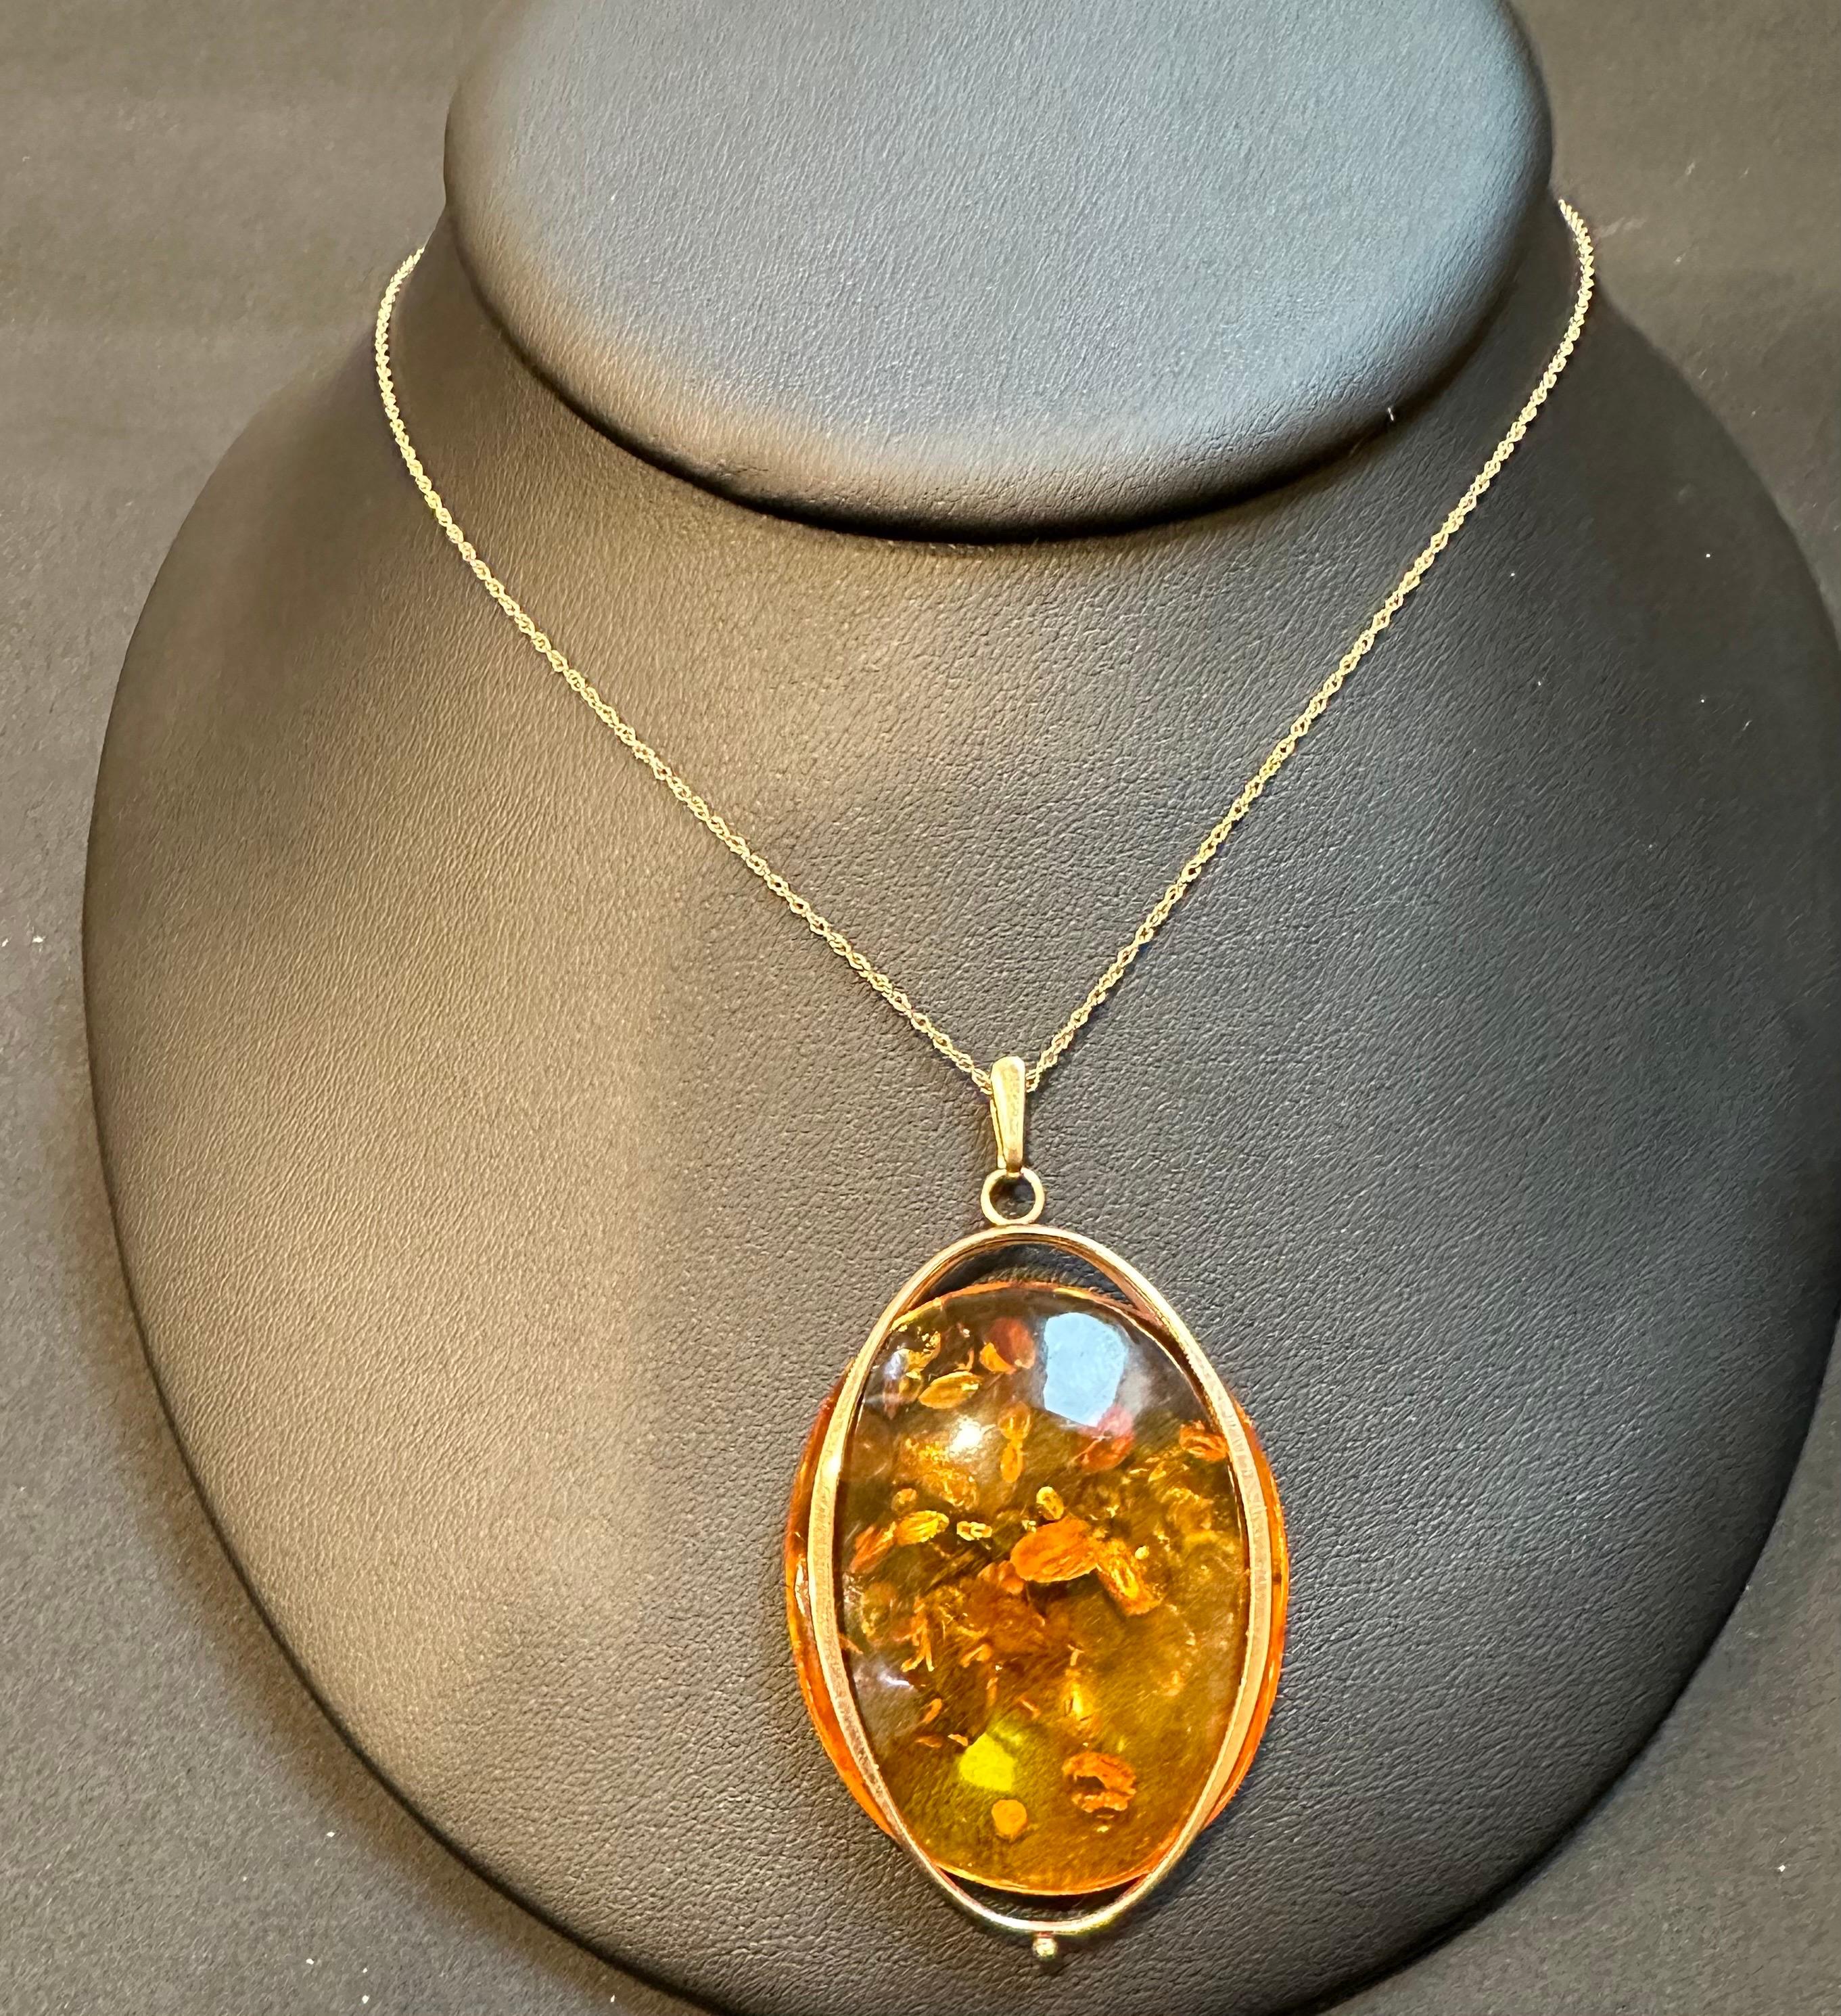 This Large Natural Russian Amber Necklace or Pendant in 14Karat Yellow Gold + Chain is a beautiful piece of jewelry that showcases the intense color of amber. The pendant features a bail for a chain and comes with a beautiful 16-inch long chain.